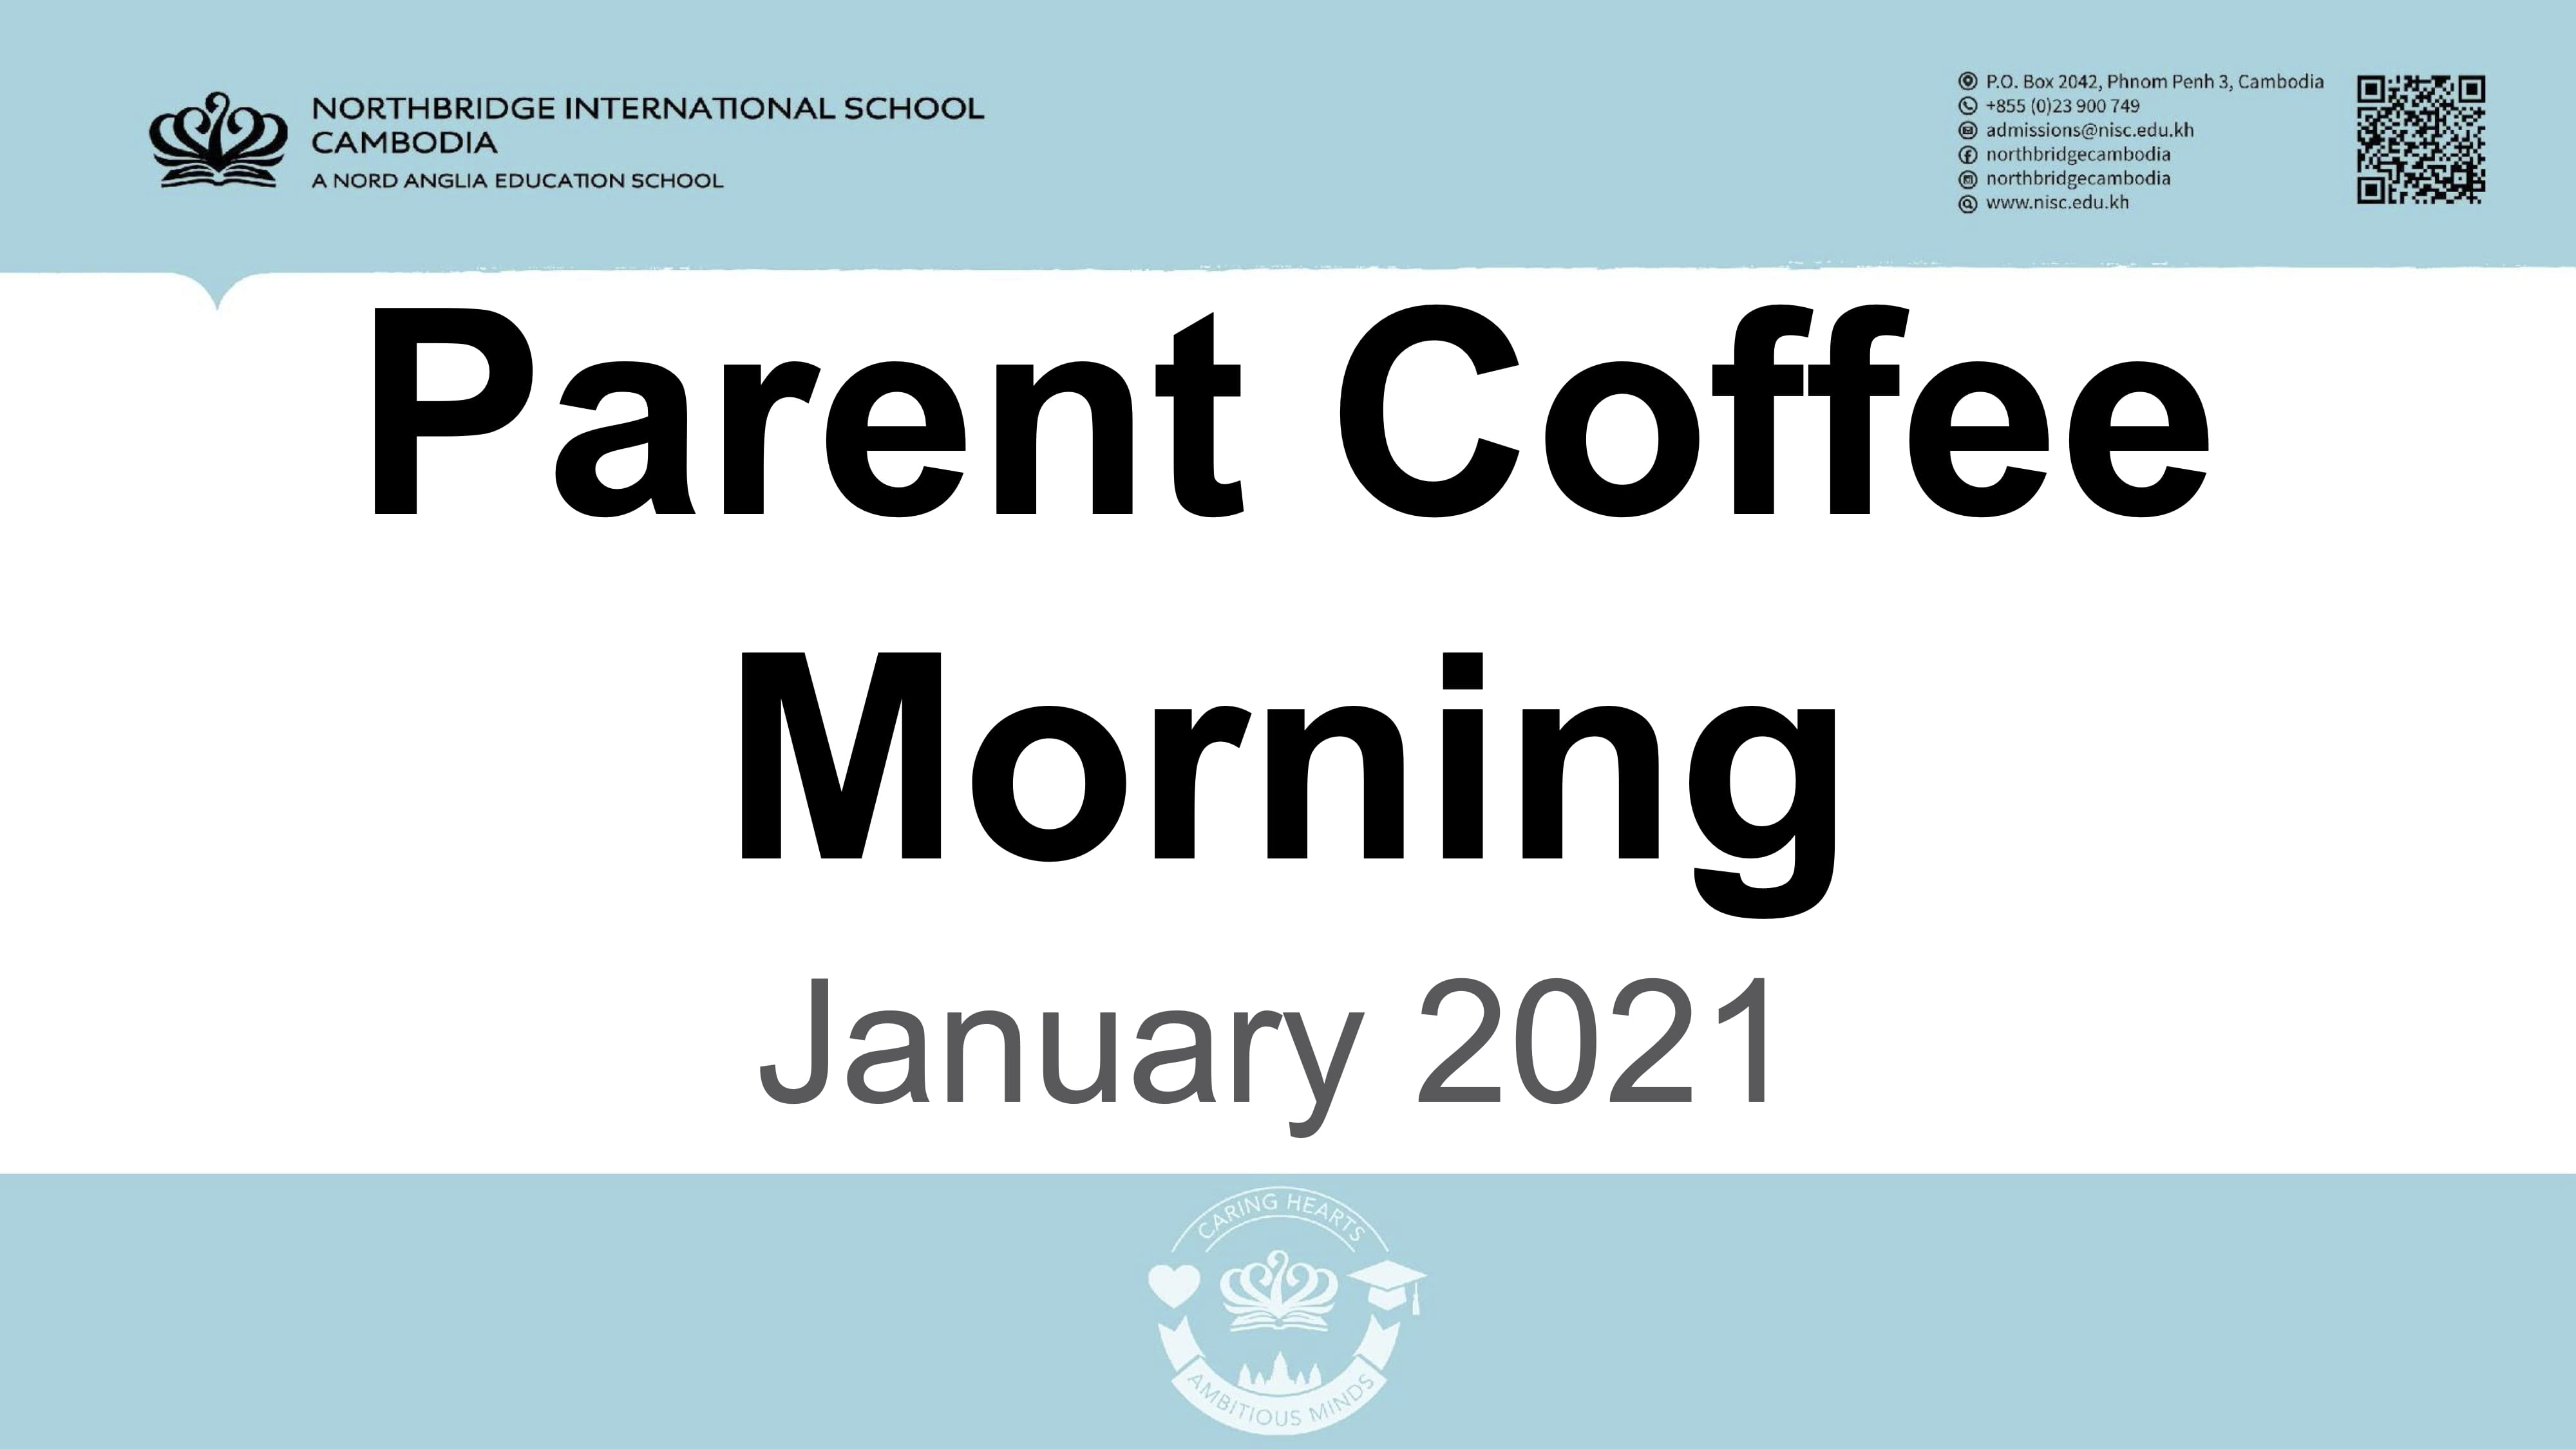 Highlights from the Northbridge Parent Coffee Morning held on Friday 29 January-highlights-from-the-northbridge-parent-coffee-morning-held-on-friday-29-january-Parent Coffee Morning January 2021